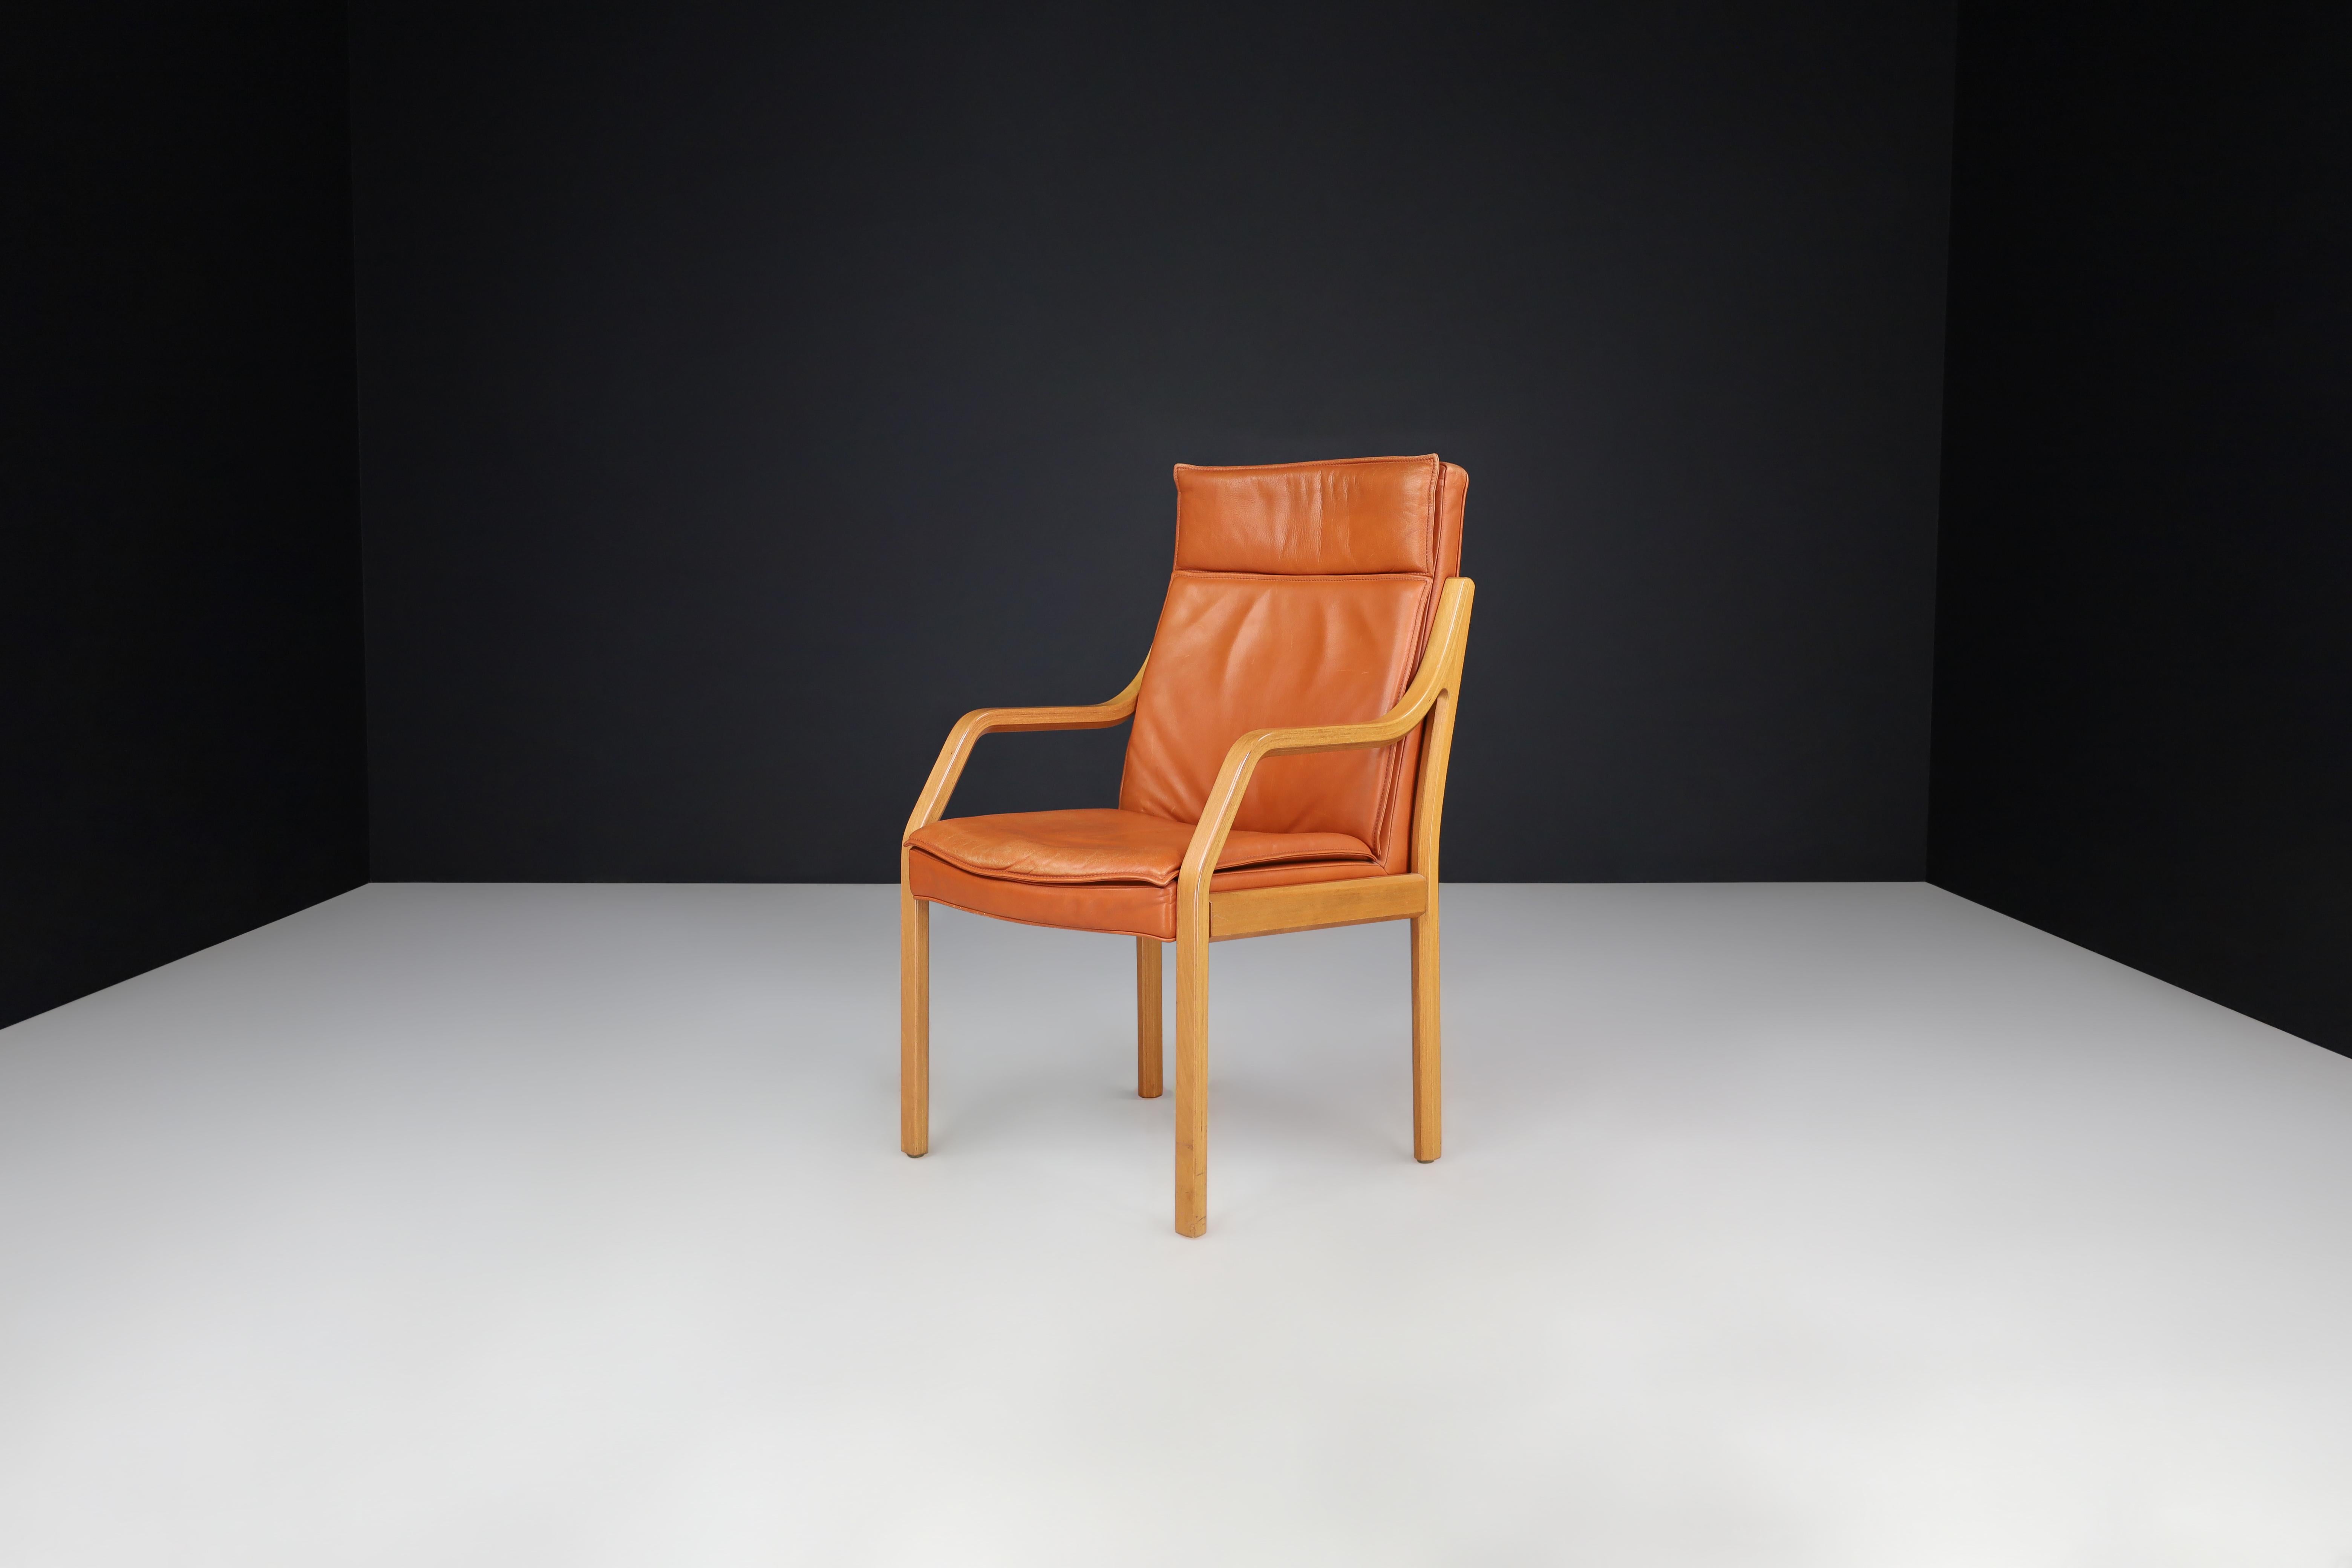 Walter Knoll Set of 16 Dining Room Chairs in Bentwood and Leather, Germany 1970s

A set of 16 modern armchairs or dining room chairs, manufactured by Walter Knoll in Germany during the 1970s, has been upholstered in cognac leather. These